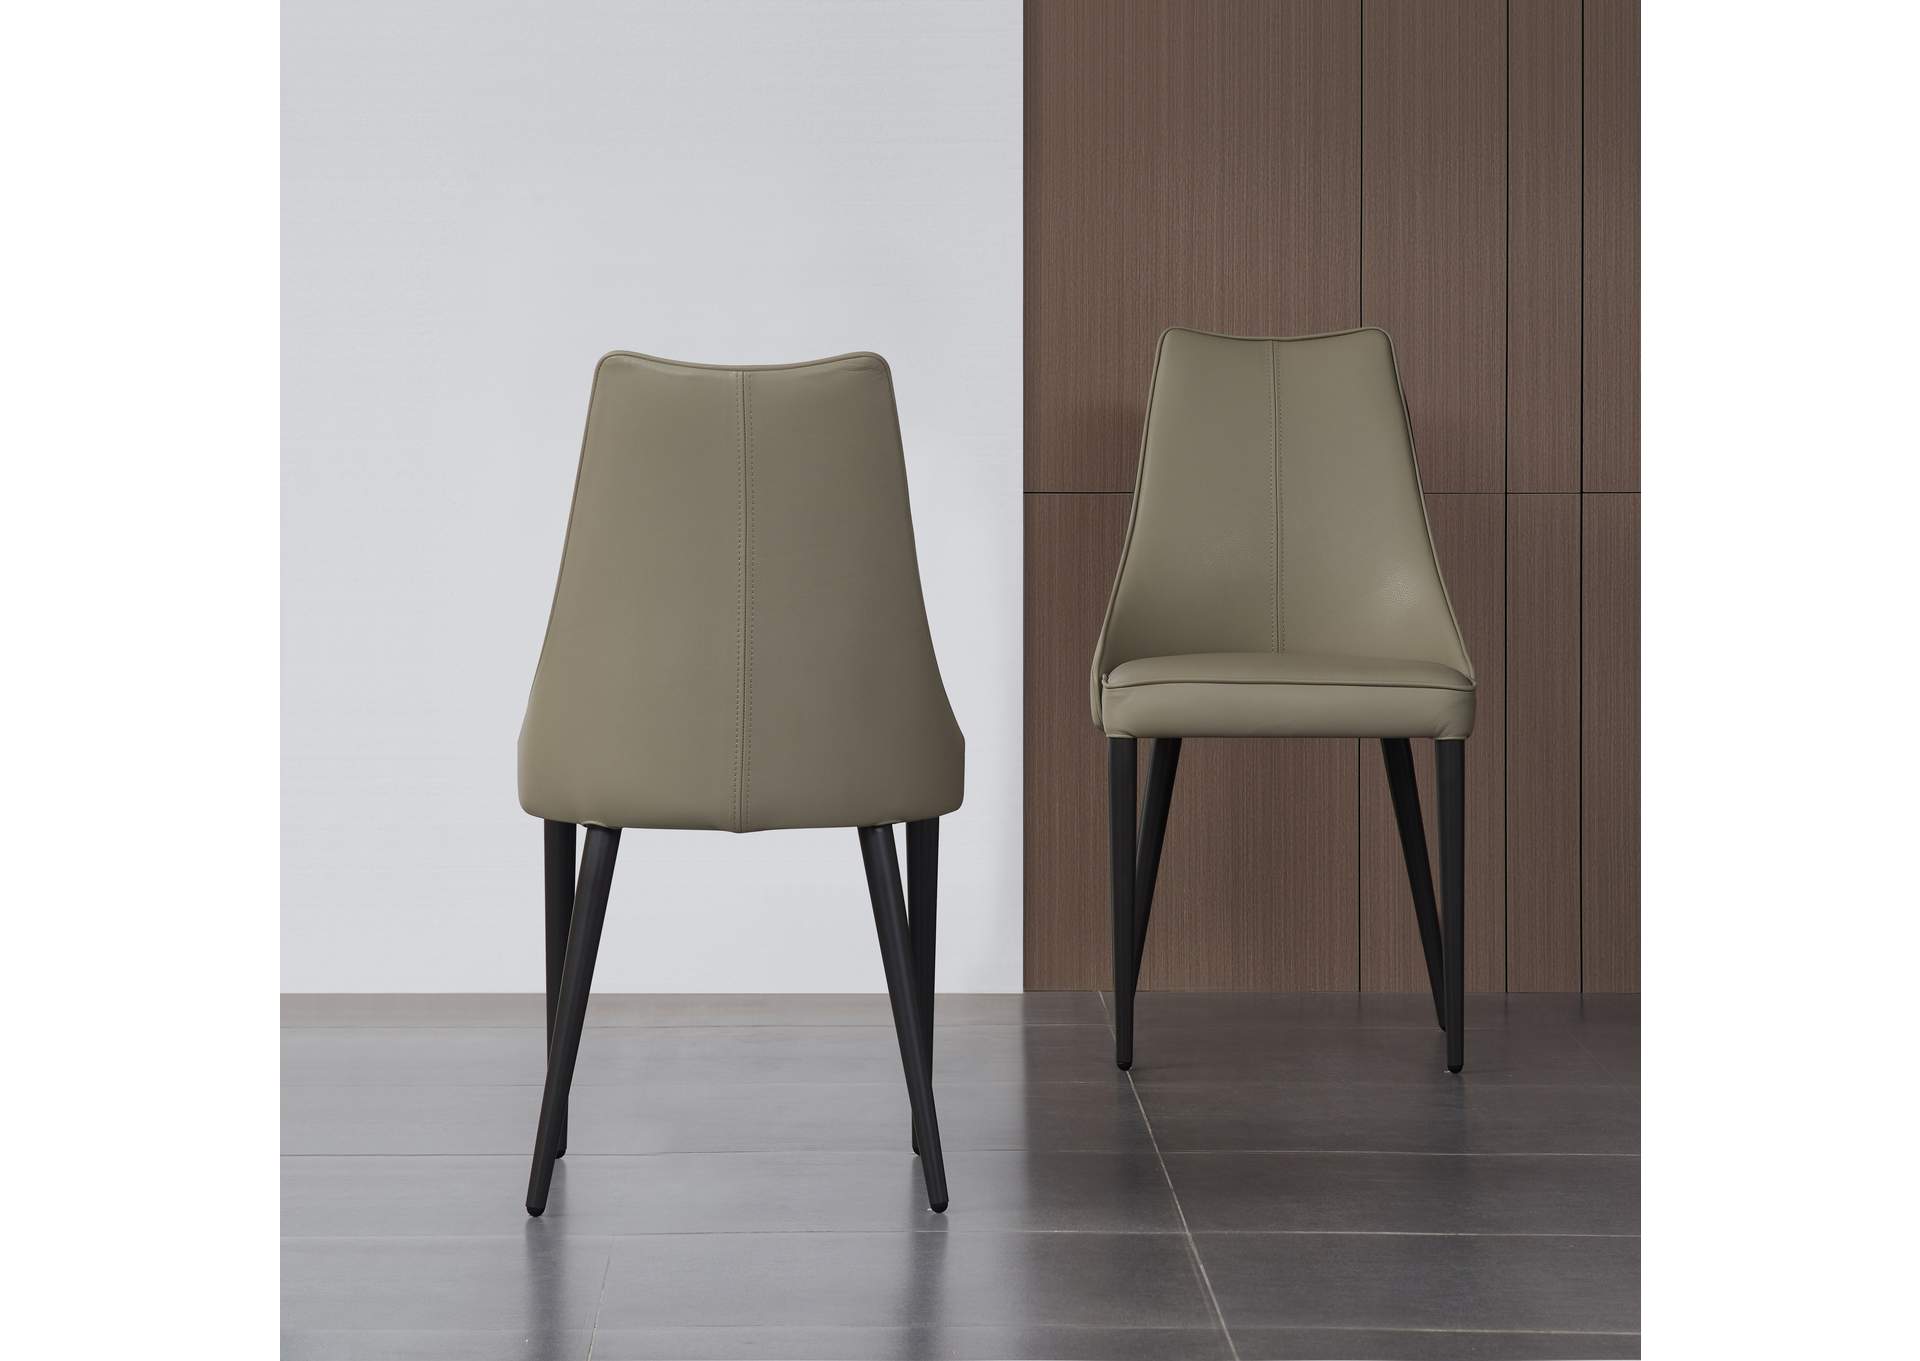 Milano Leather Dining Chair In Light Grey,J&M Furniture